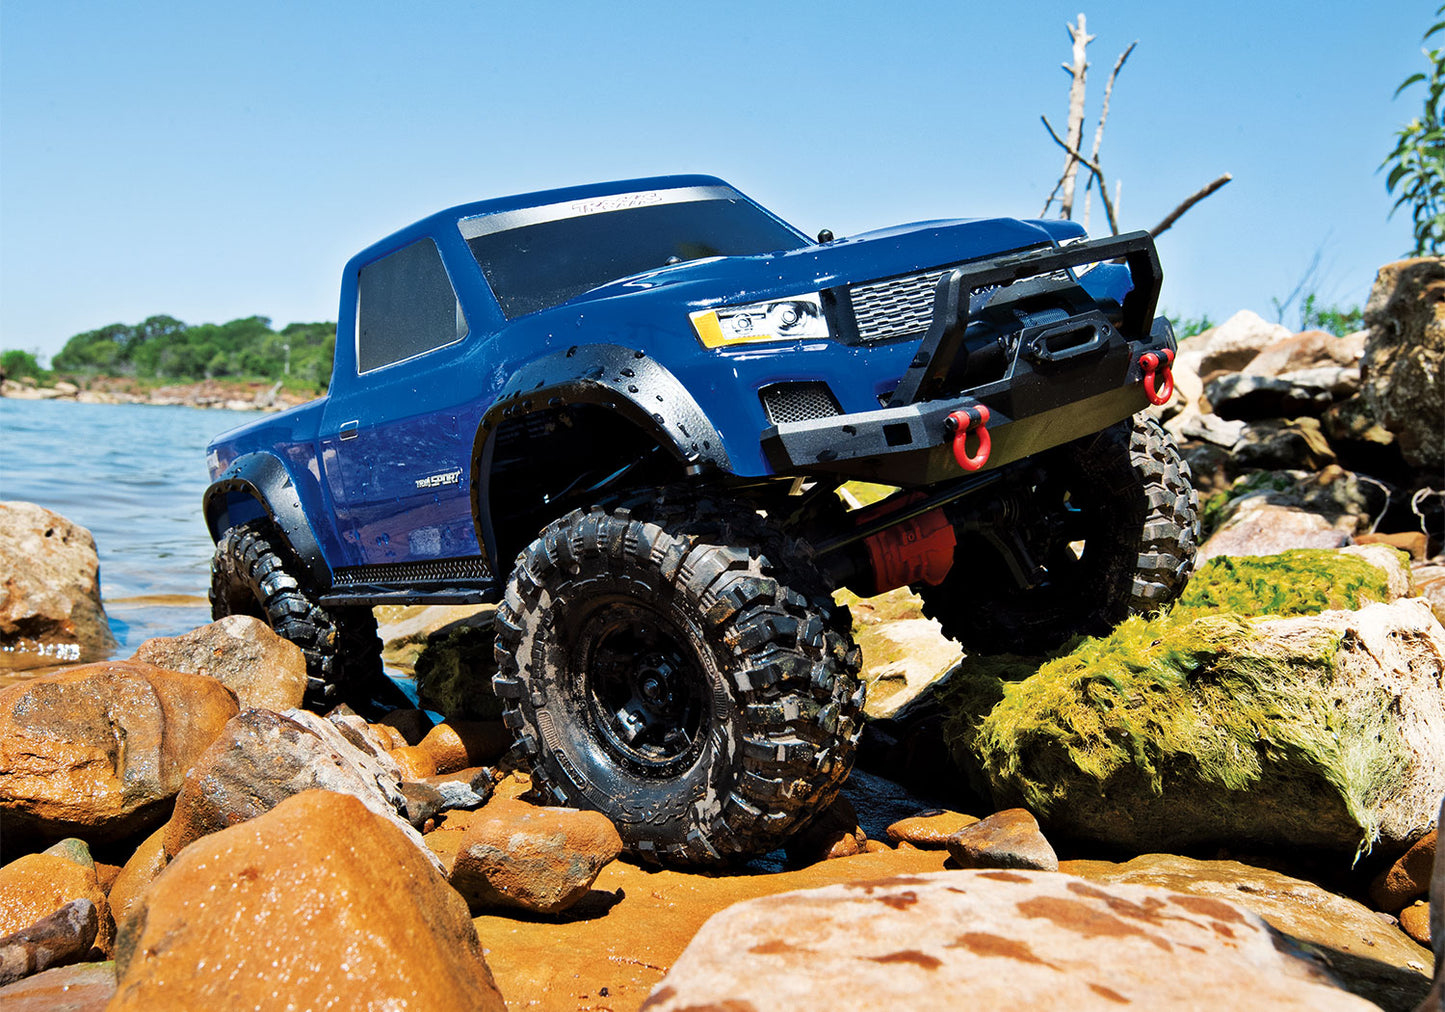 Traxxas TRX-4 Sport 1/10 Scale 4X4 Trail Truck - Blue, Fully-Assembled, Waterproof Electronics, Ready-To-Drive, with TQ 2.4GHz 2-Channel Radio System, XL-5 HV Speed Control, and Painted Body (Requires battery and charger)